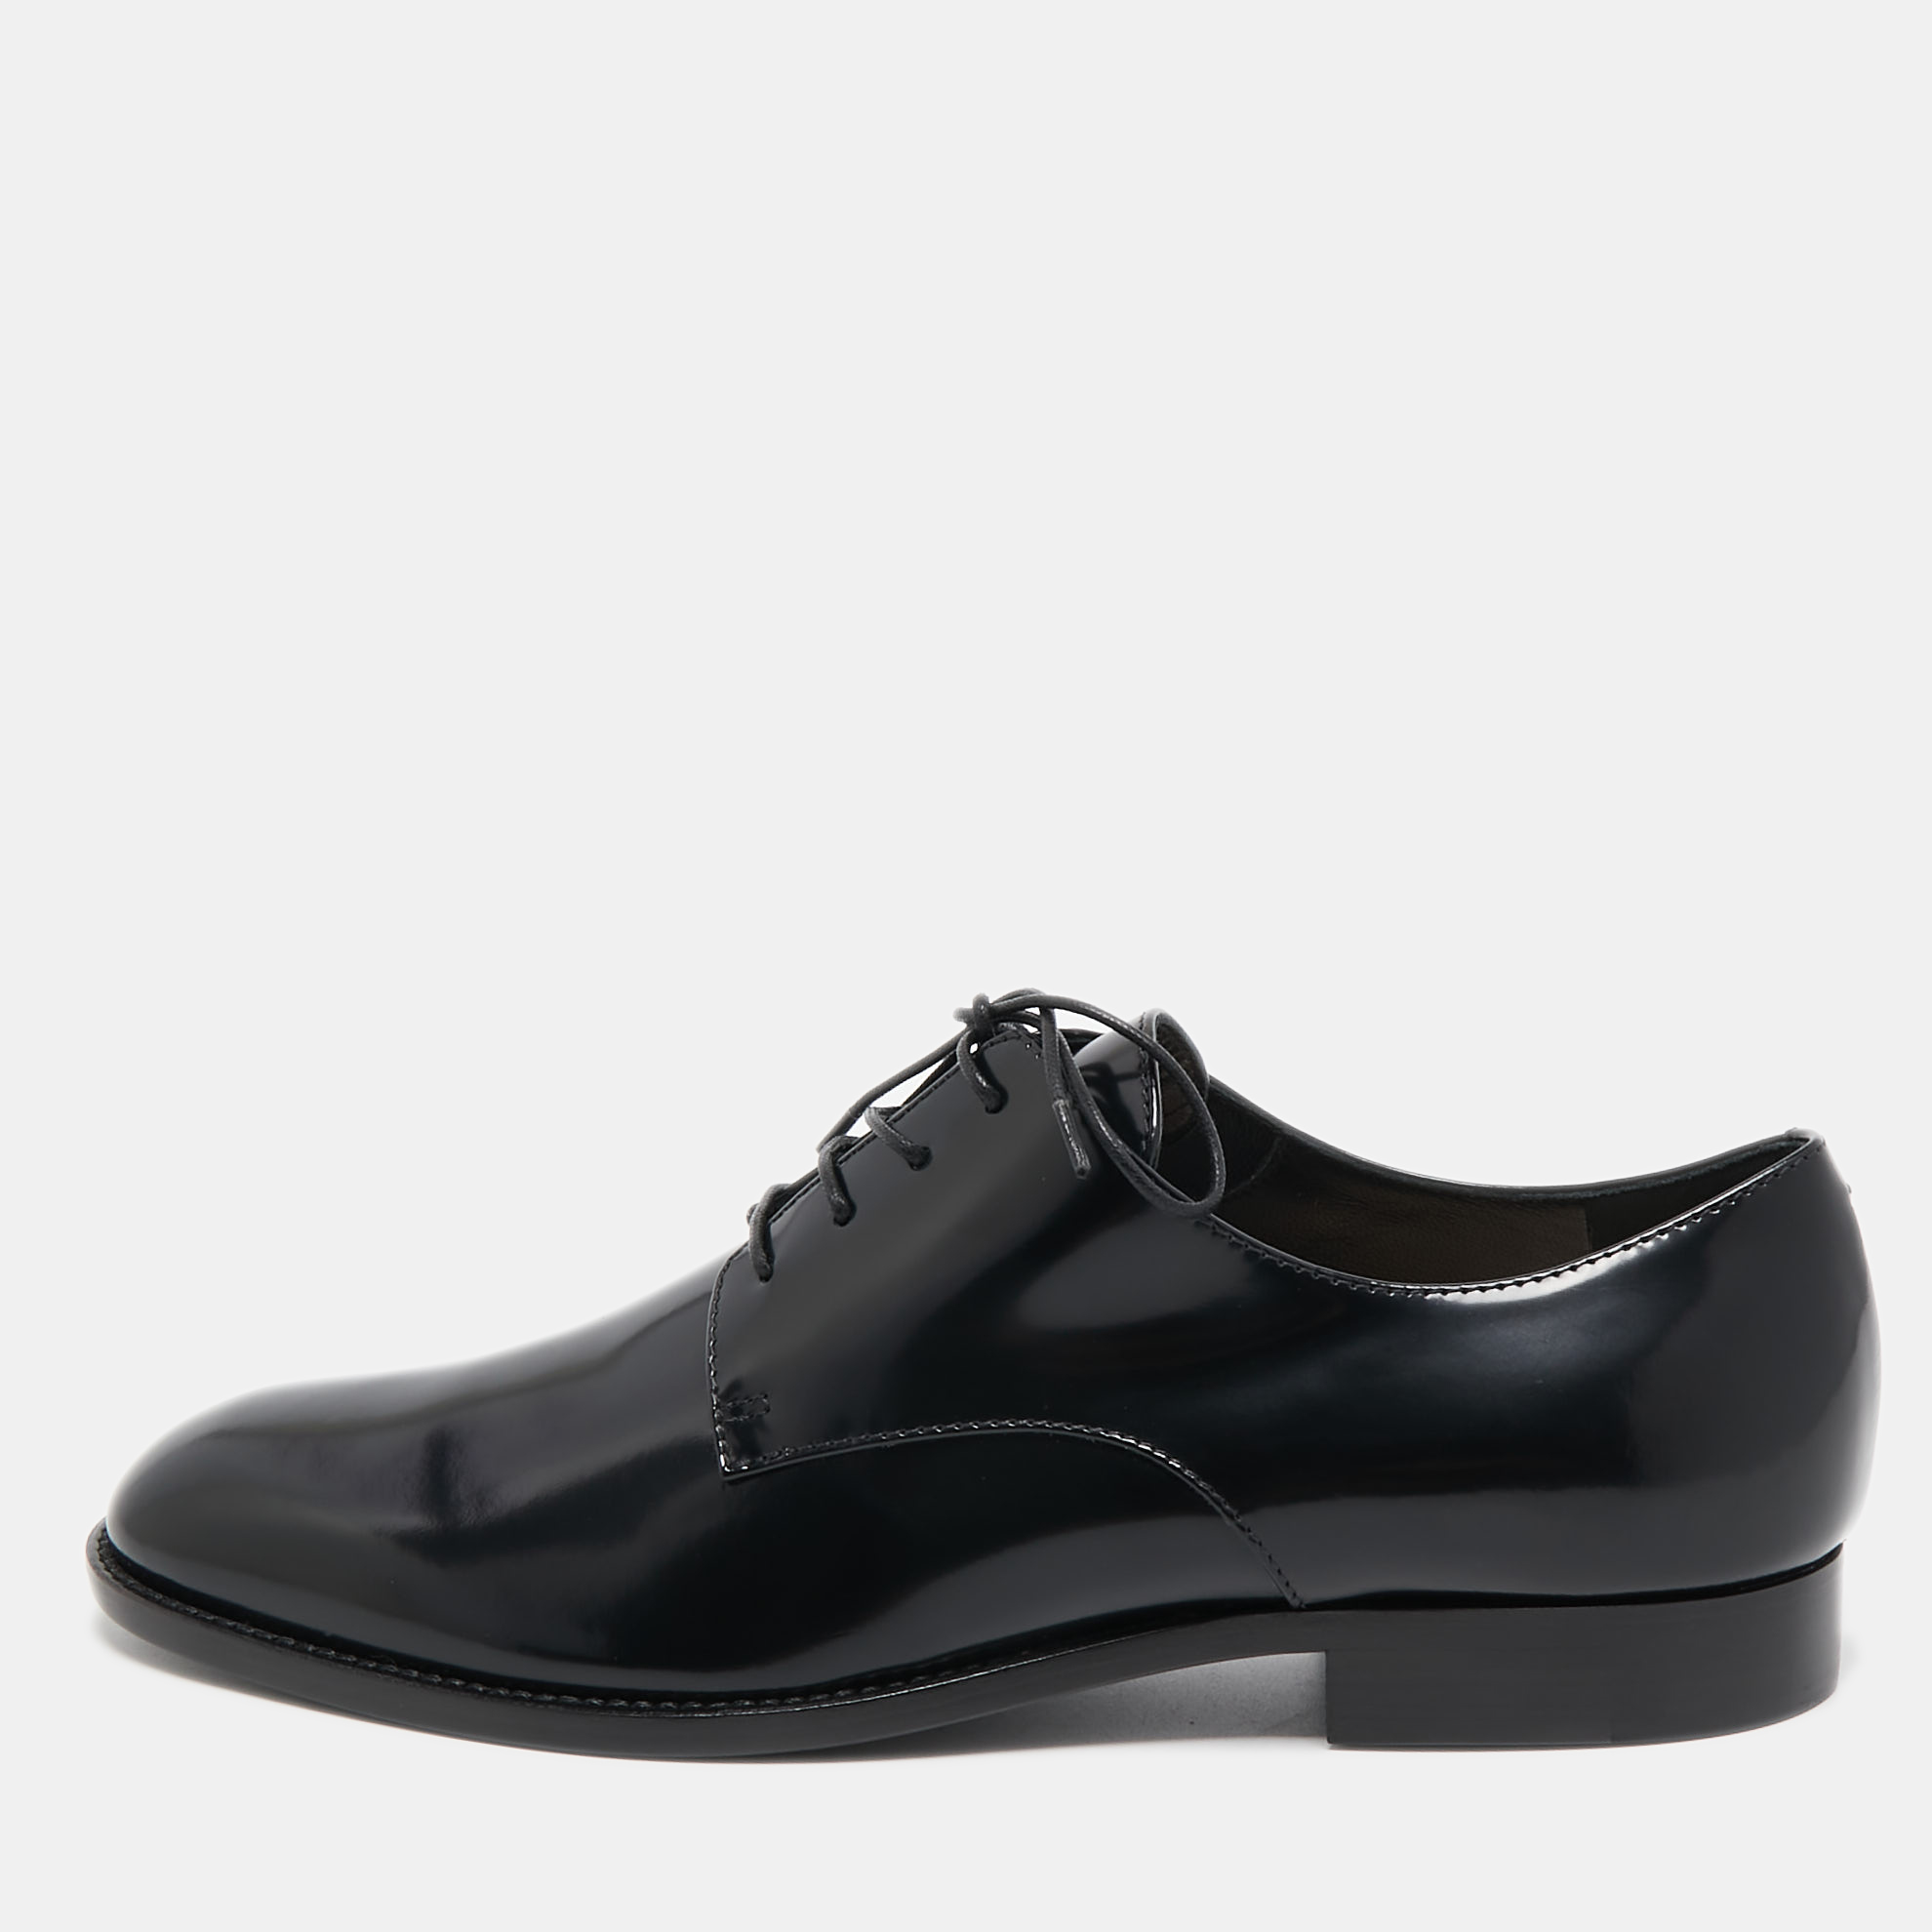 Christian Dior Black Leather Oxfords Size 37.5